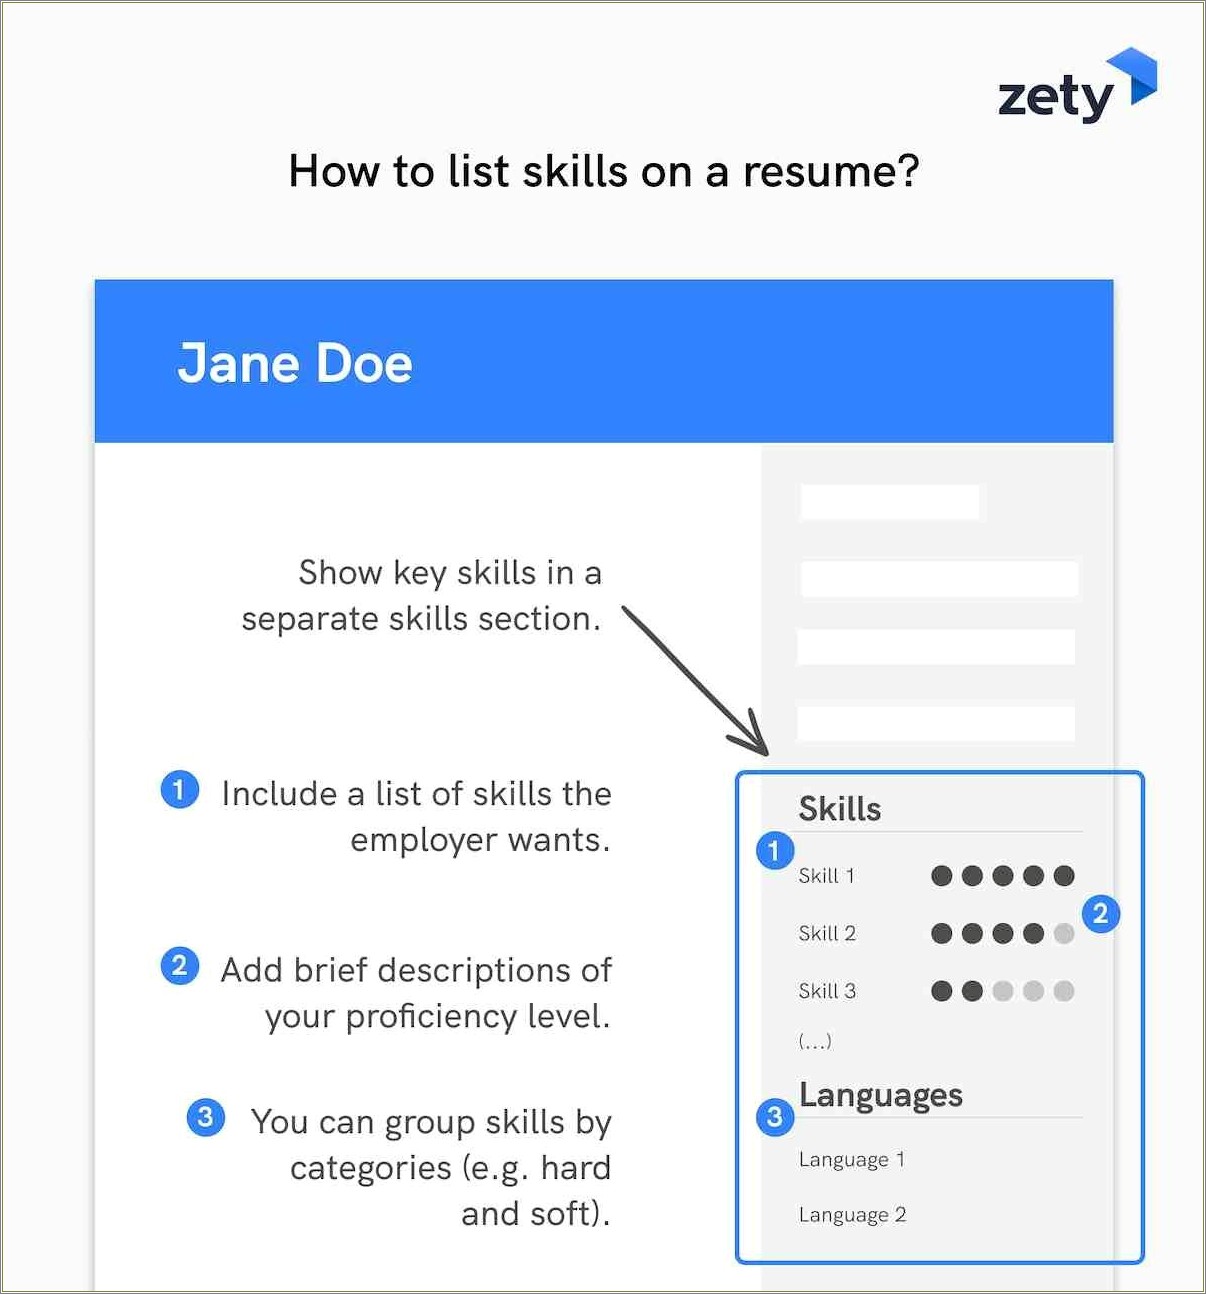 Professional Skills At Bottom Or Top Of Resume